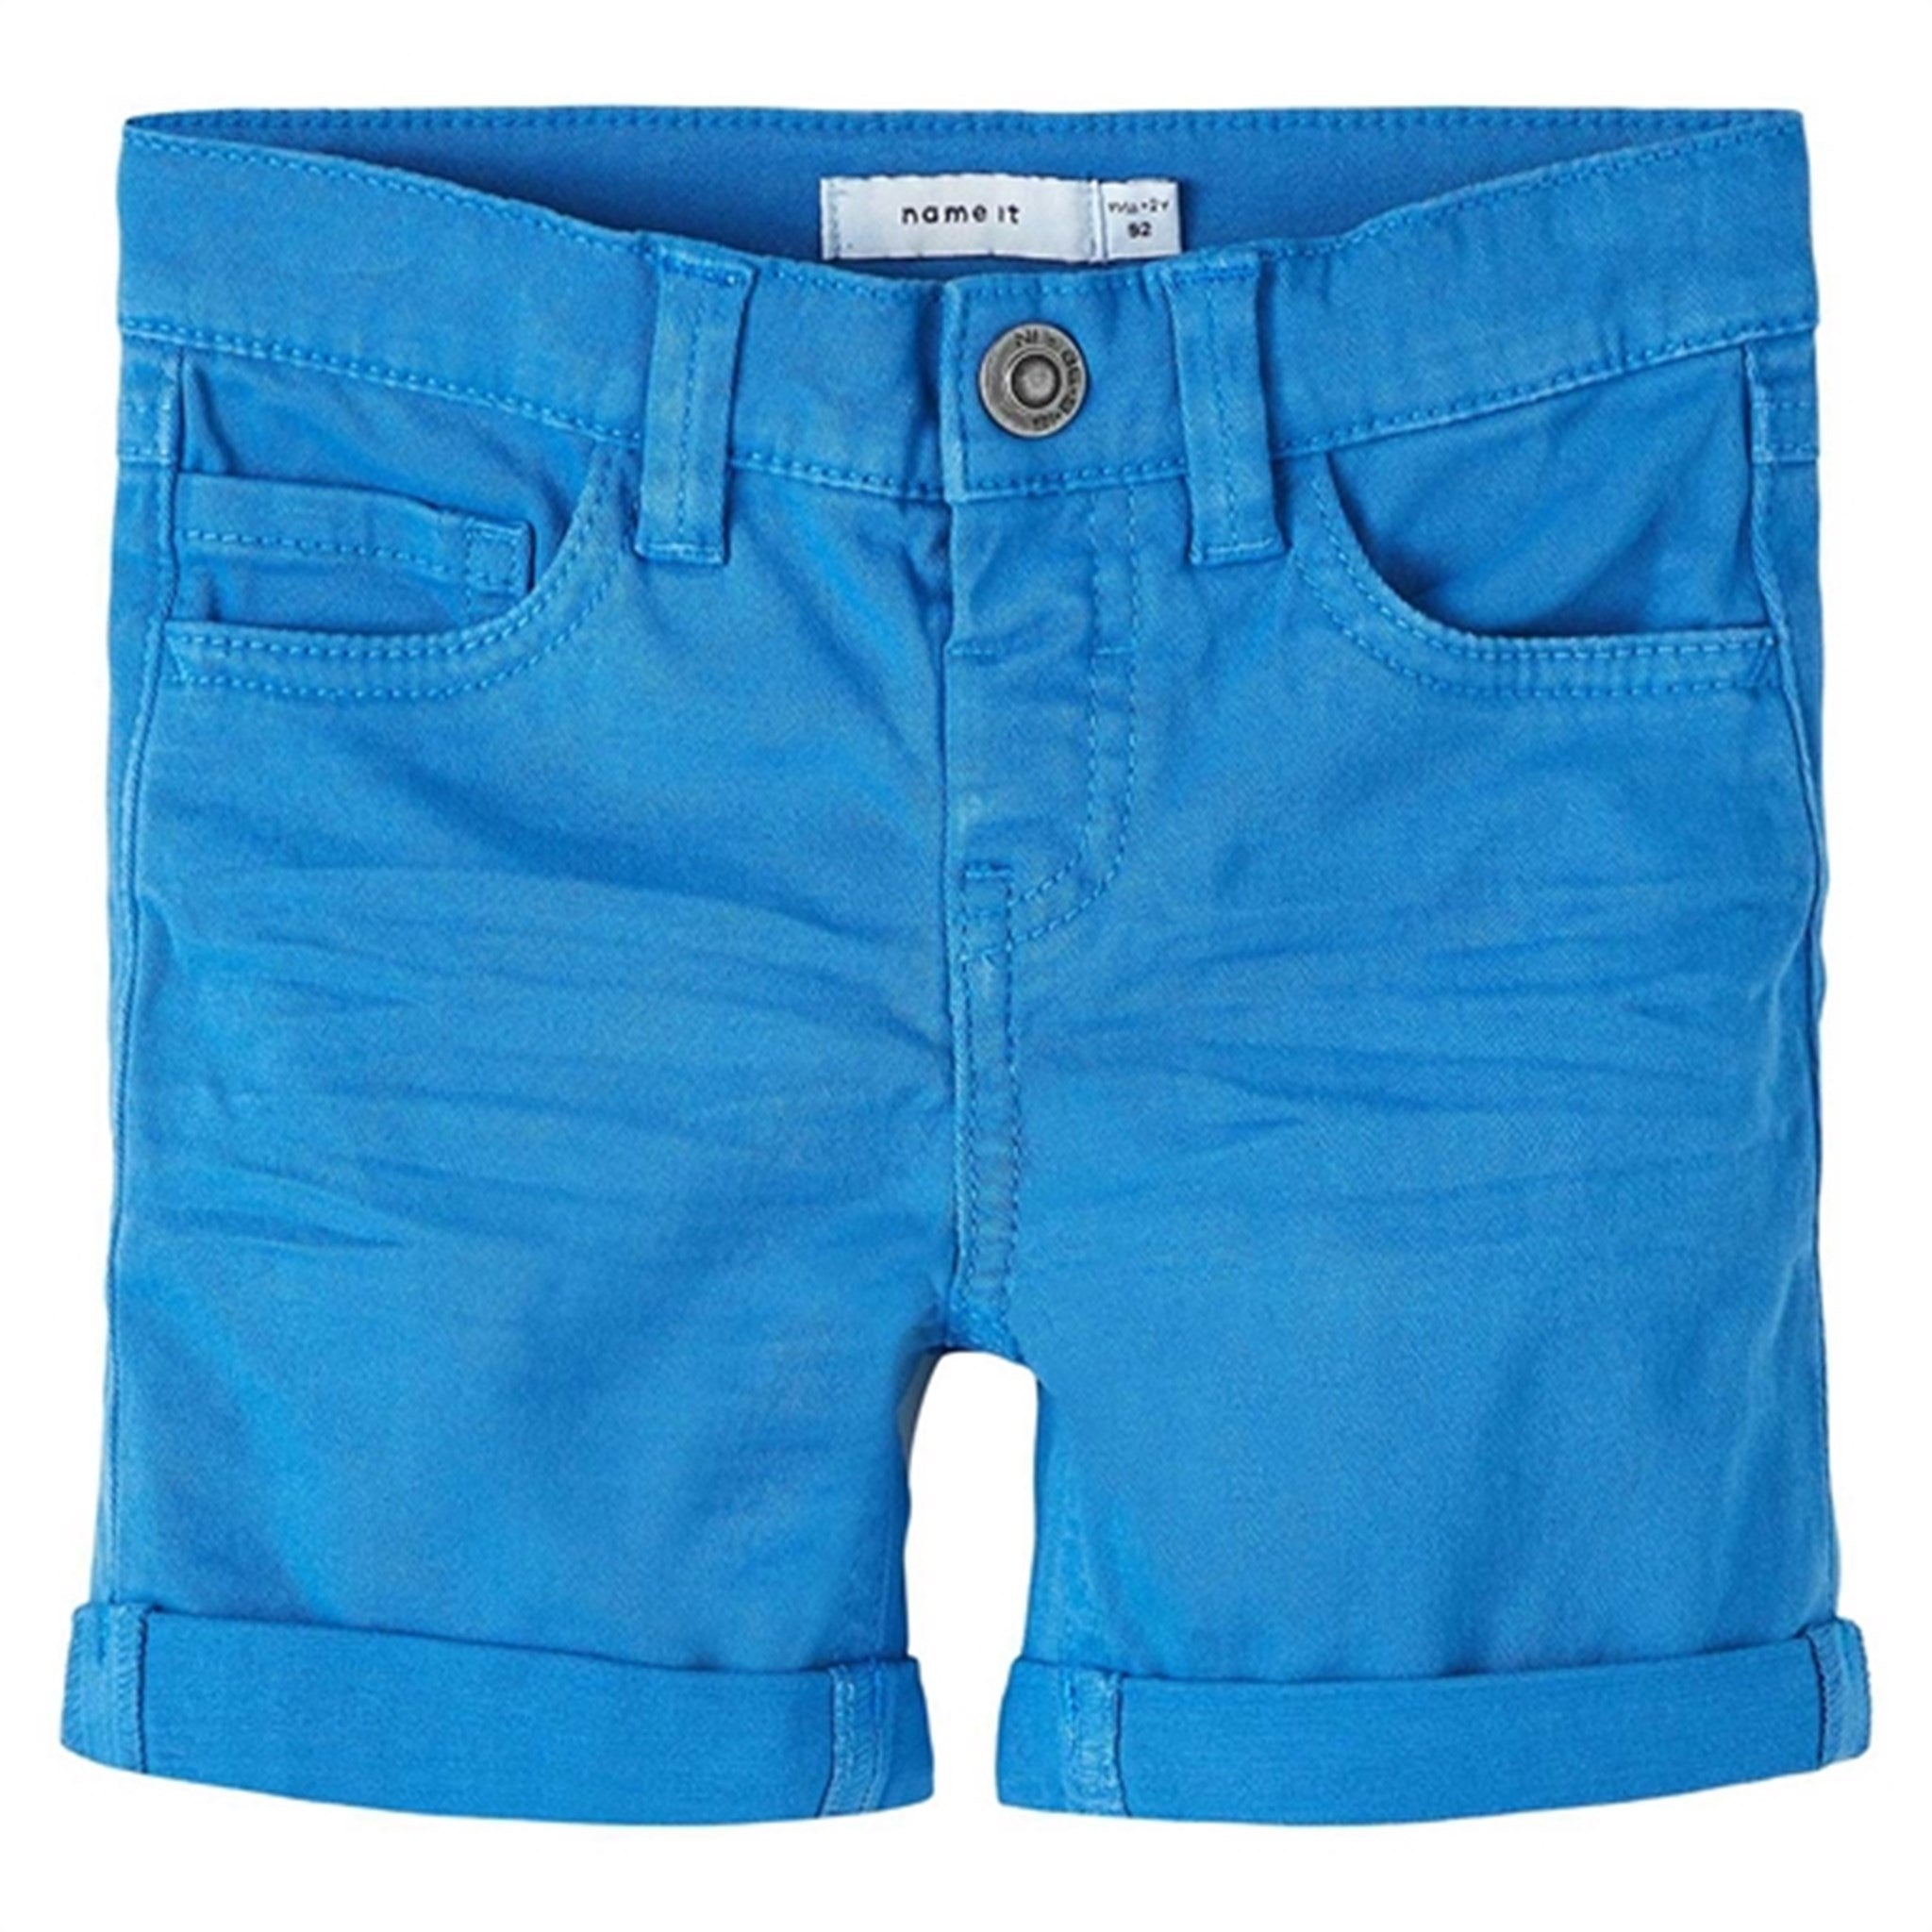 Name it French Blue Sofus Twill Shorts